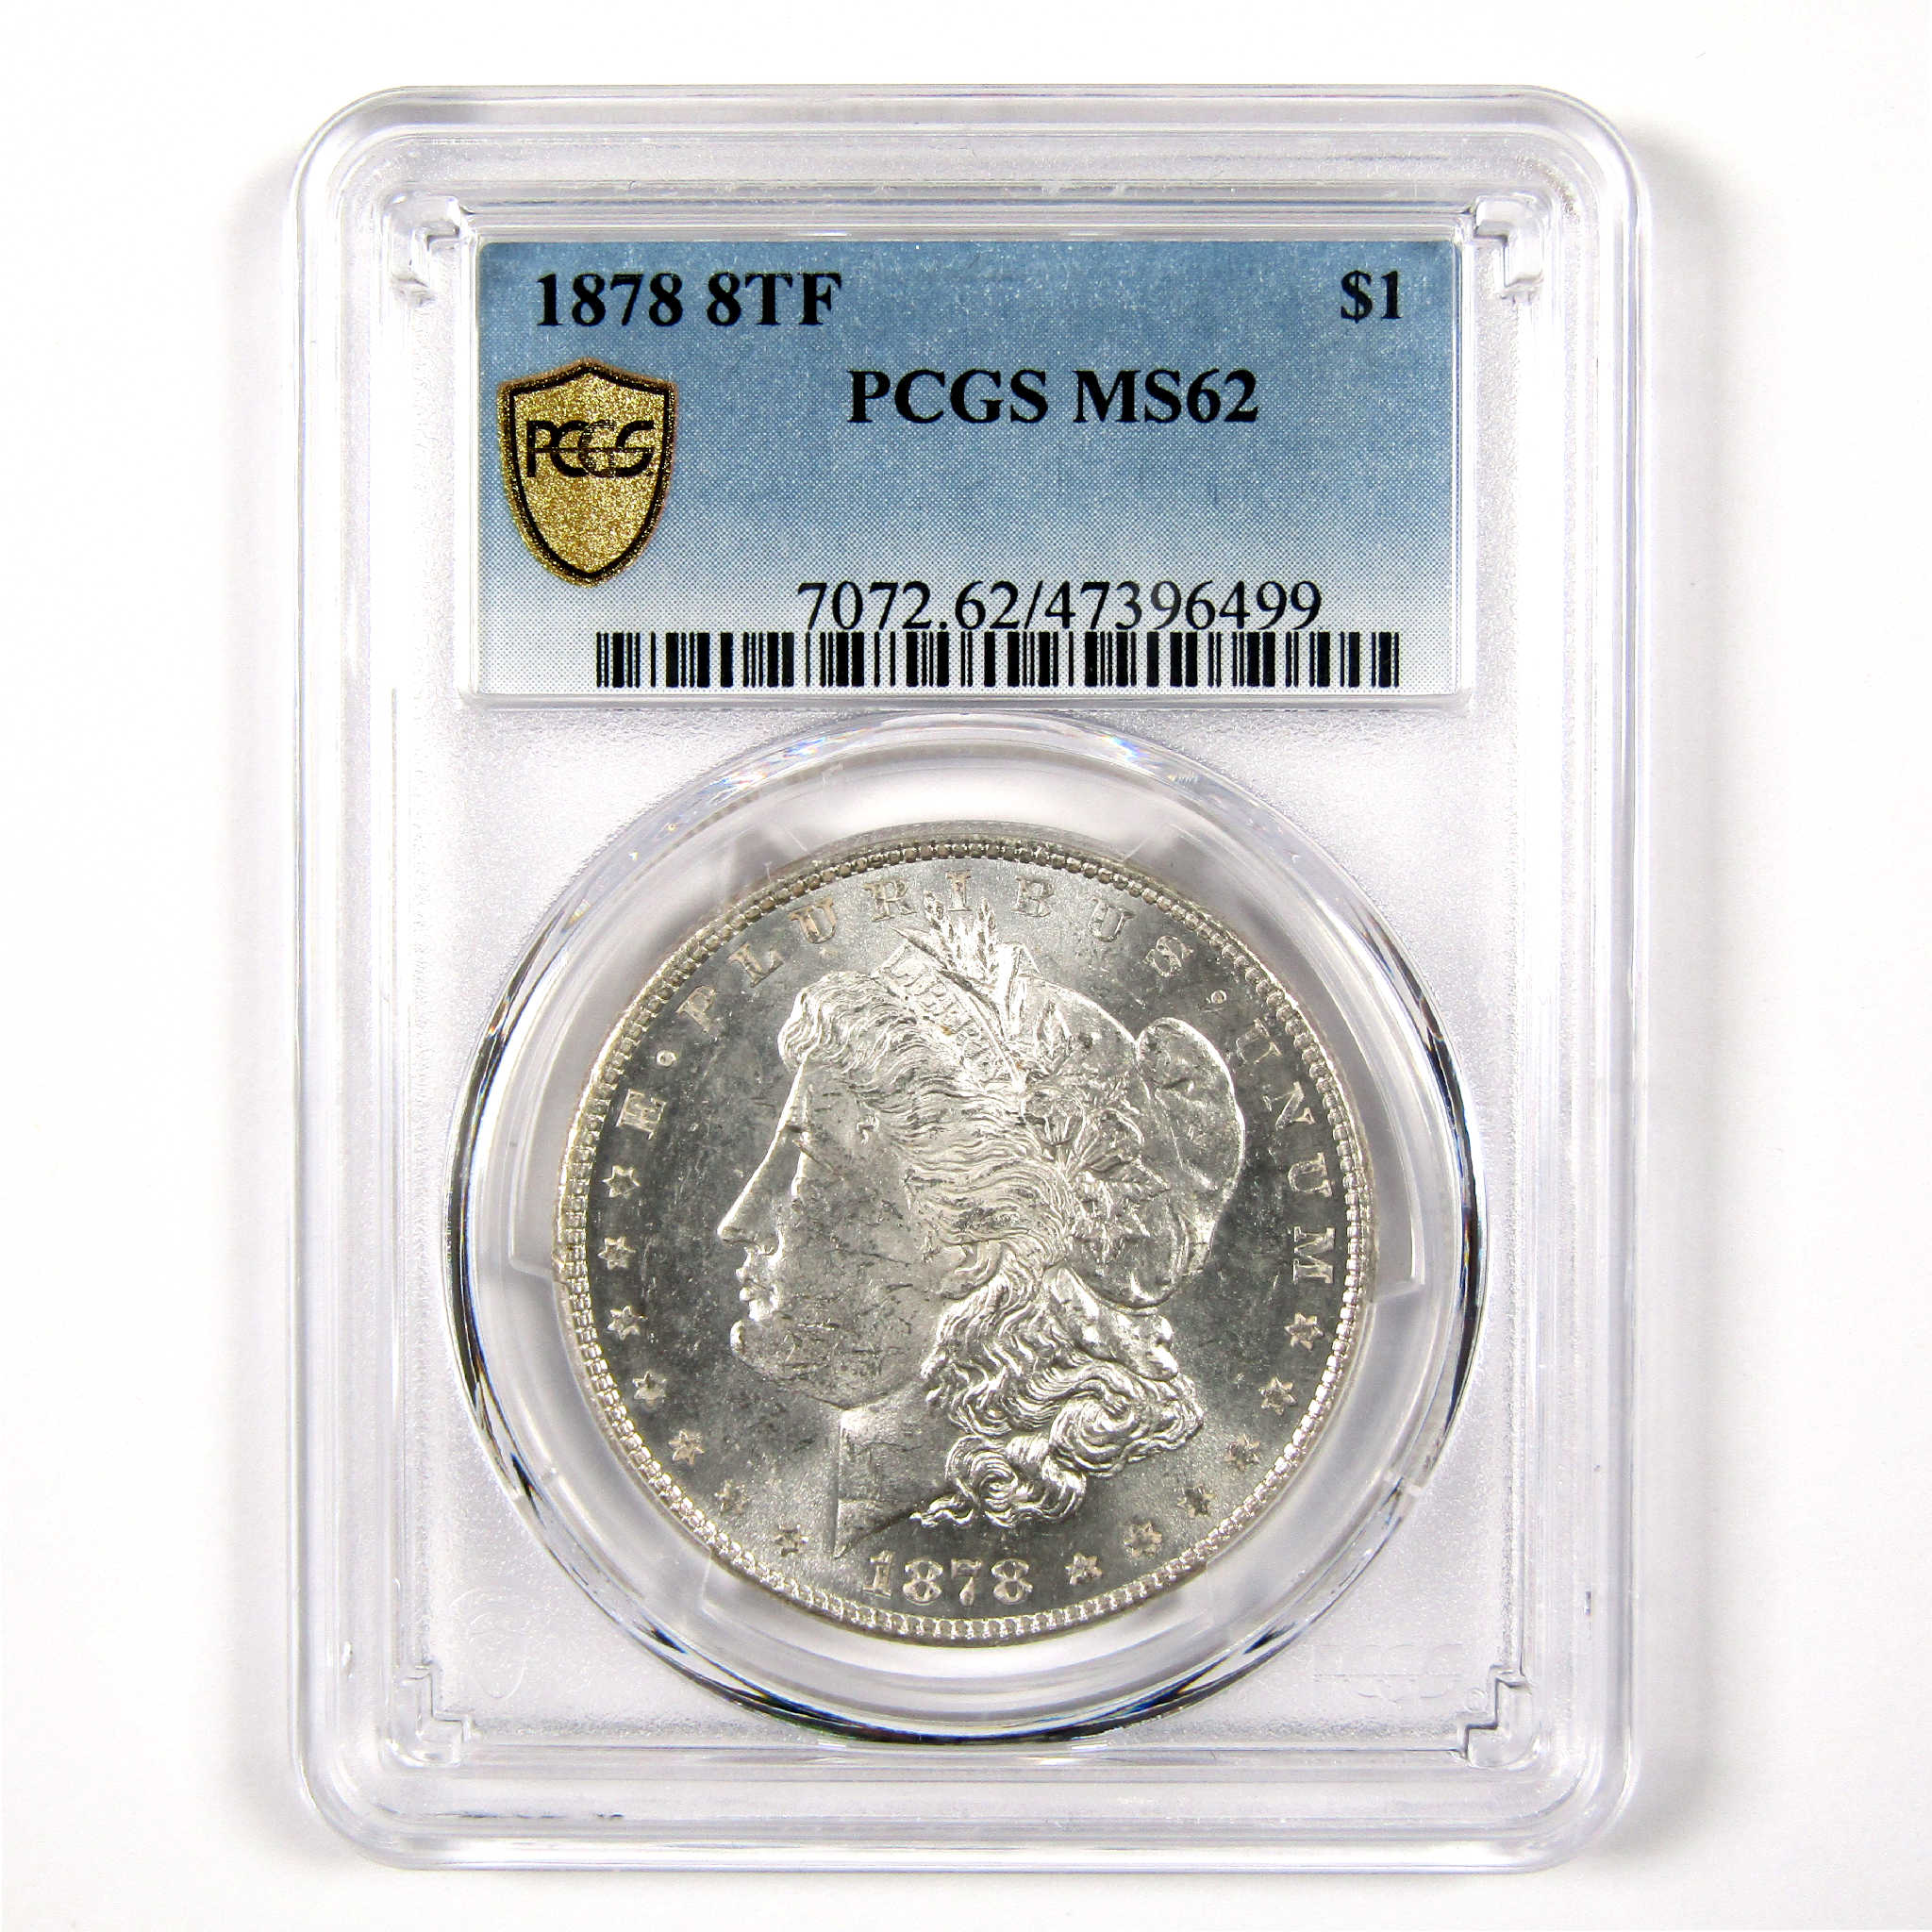 1878 8TF Morgan Dollar MS 62 PCGS Silver $1 Uncirculated SKU:I11339 - Morgan coin - Morgan silver dollar - Morgan silver dollar for sale - Profile Coins &amp; Collectibles